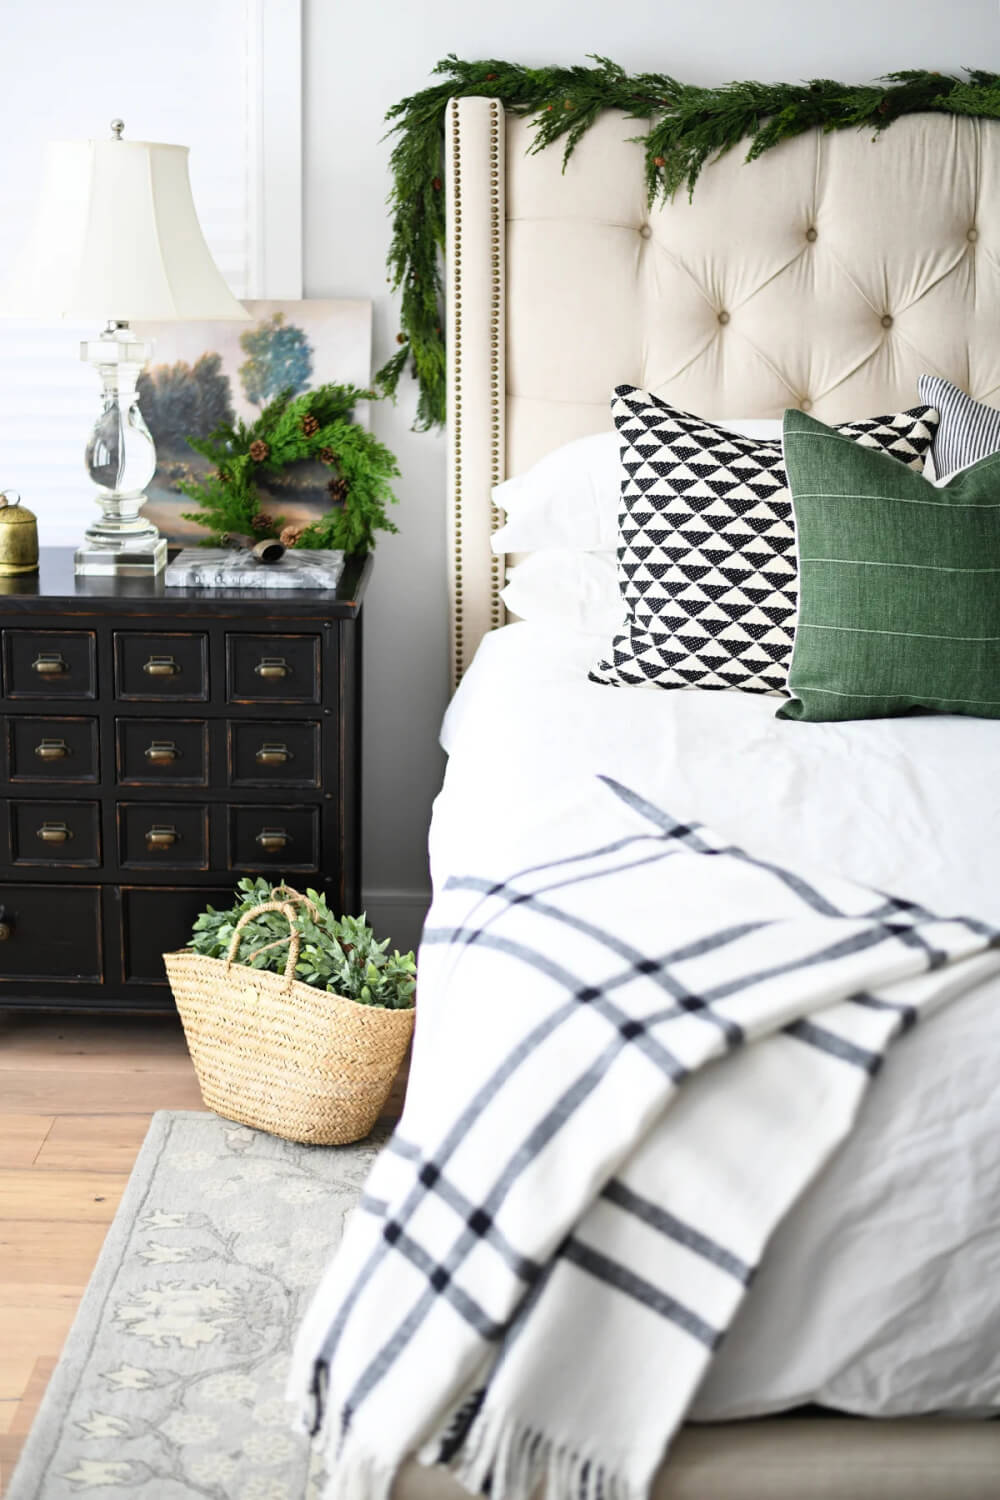 In The Love Of Home Files #6, a bedroom decked out in green and black for the holidays